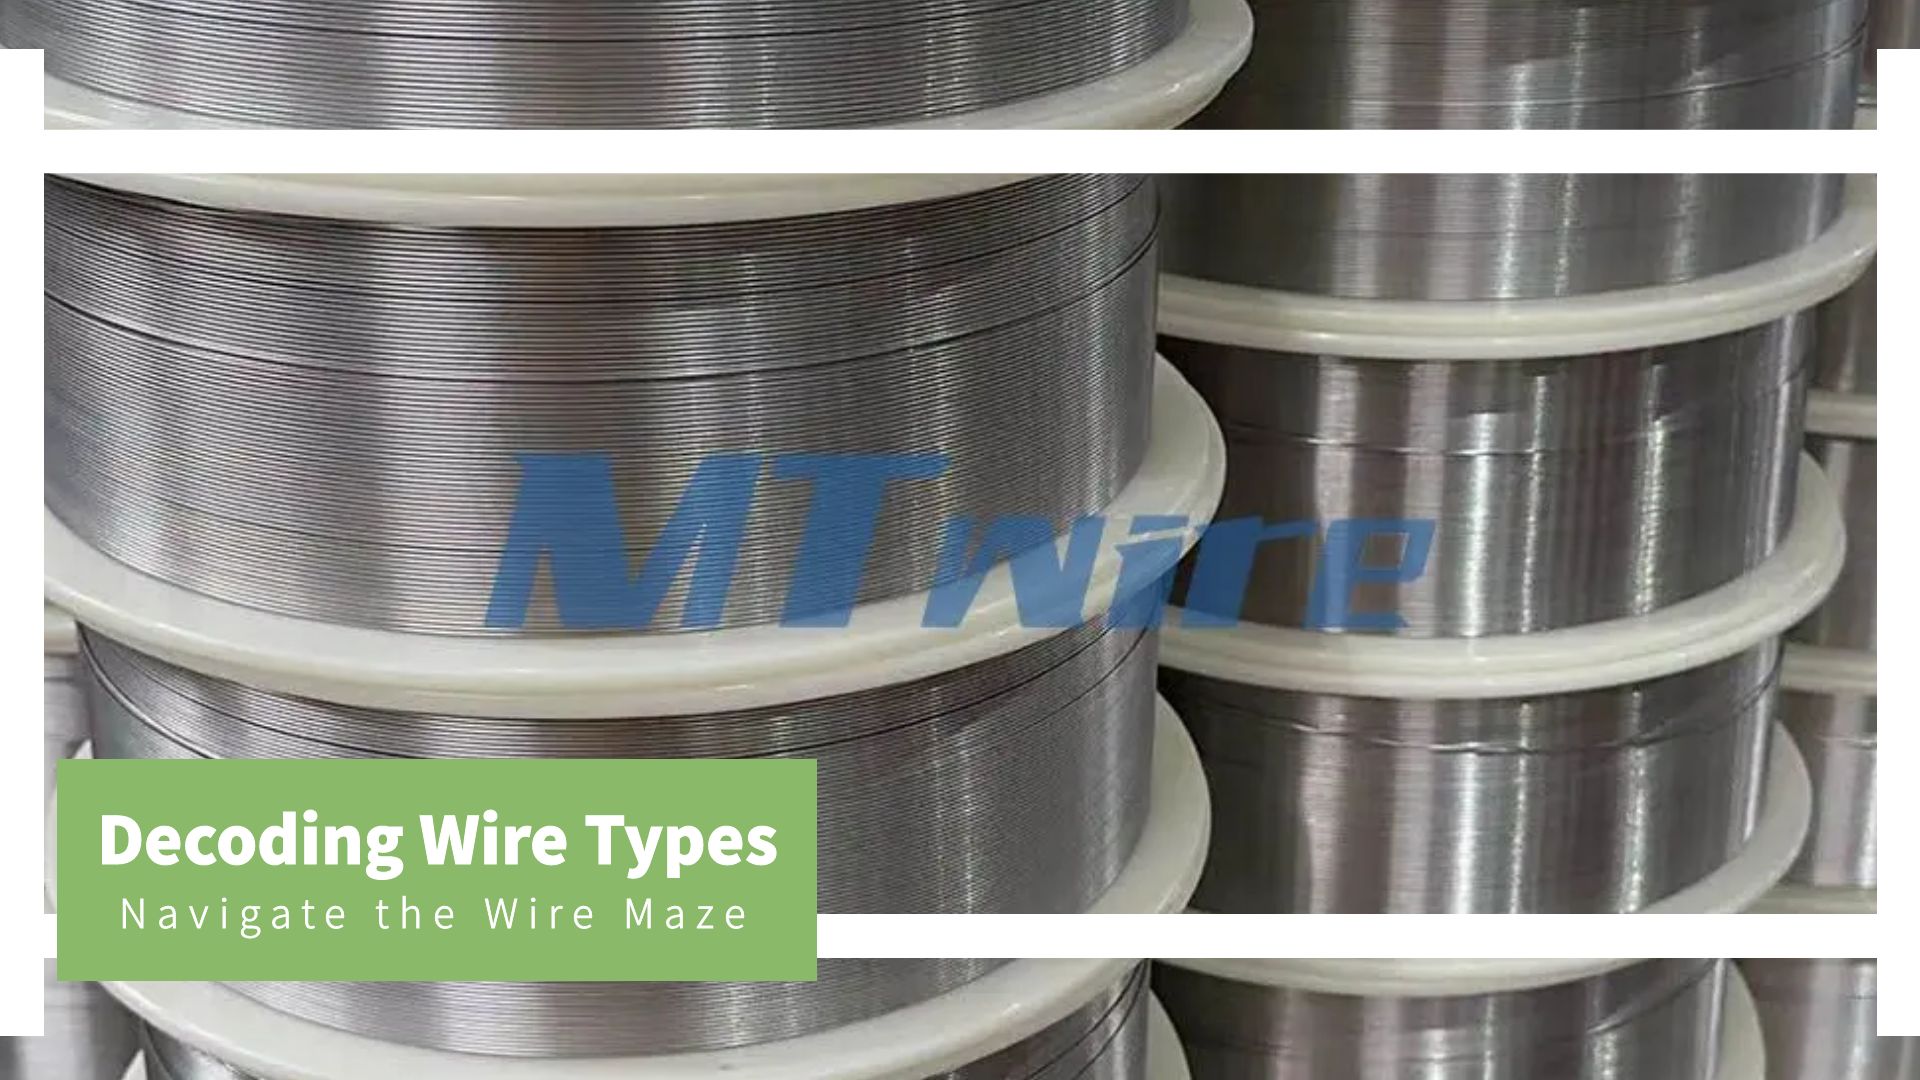 Wire Decoding: Understand All Kinds of Wire in One Article